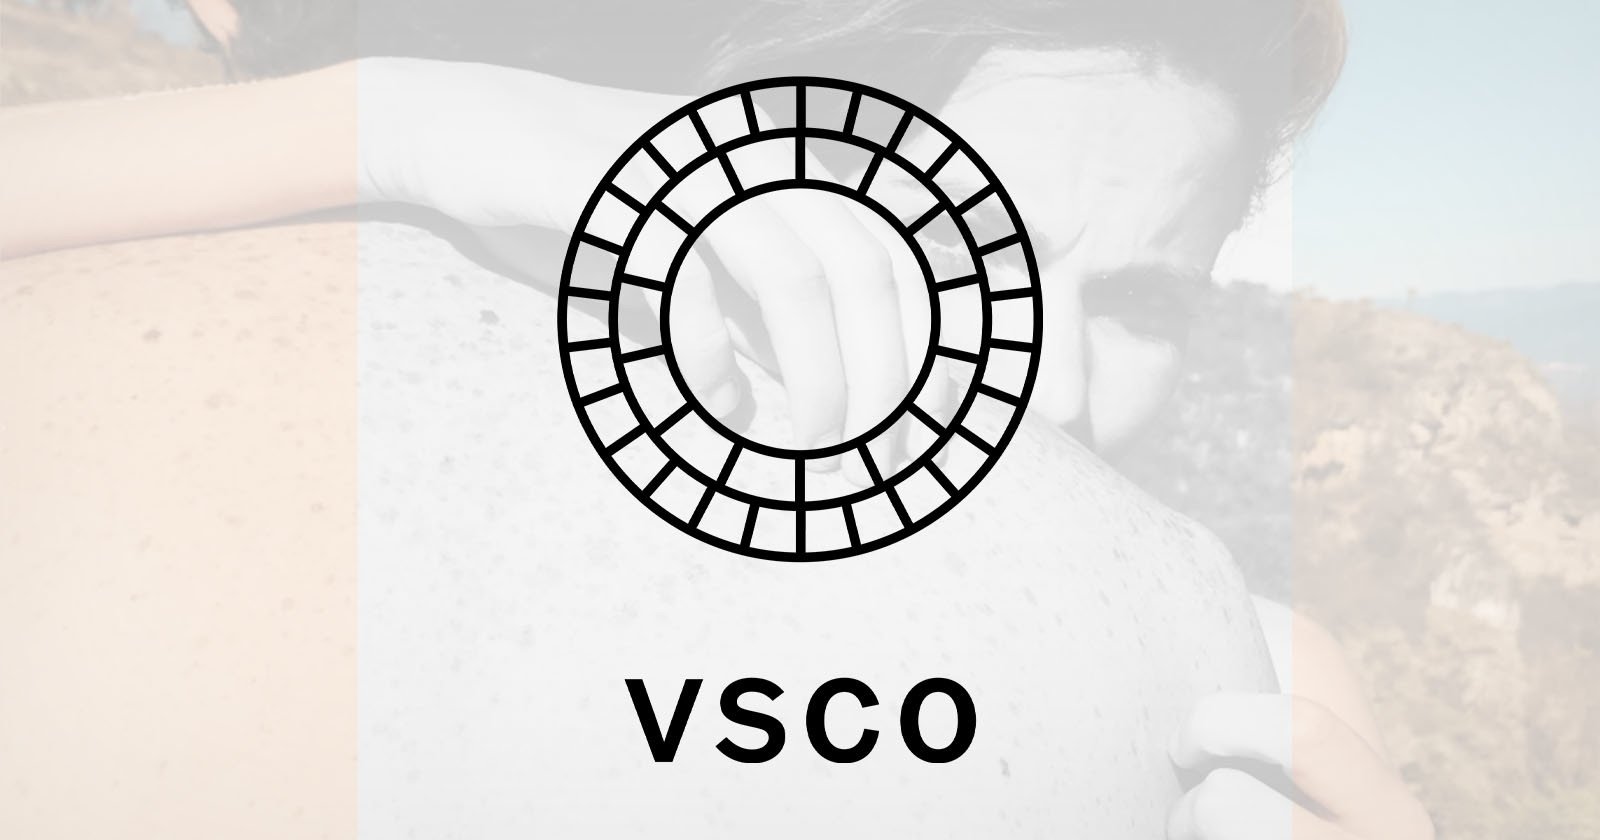 VSCO Relaunches to Focus on Serving More Serious Creatives